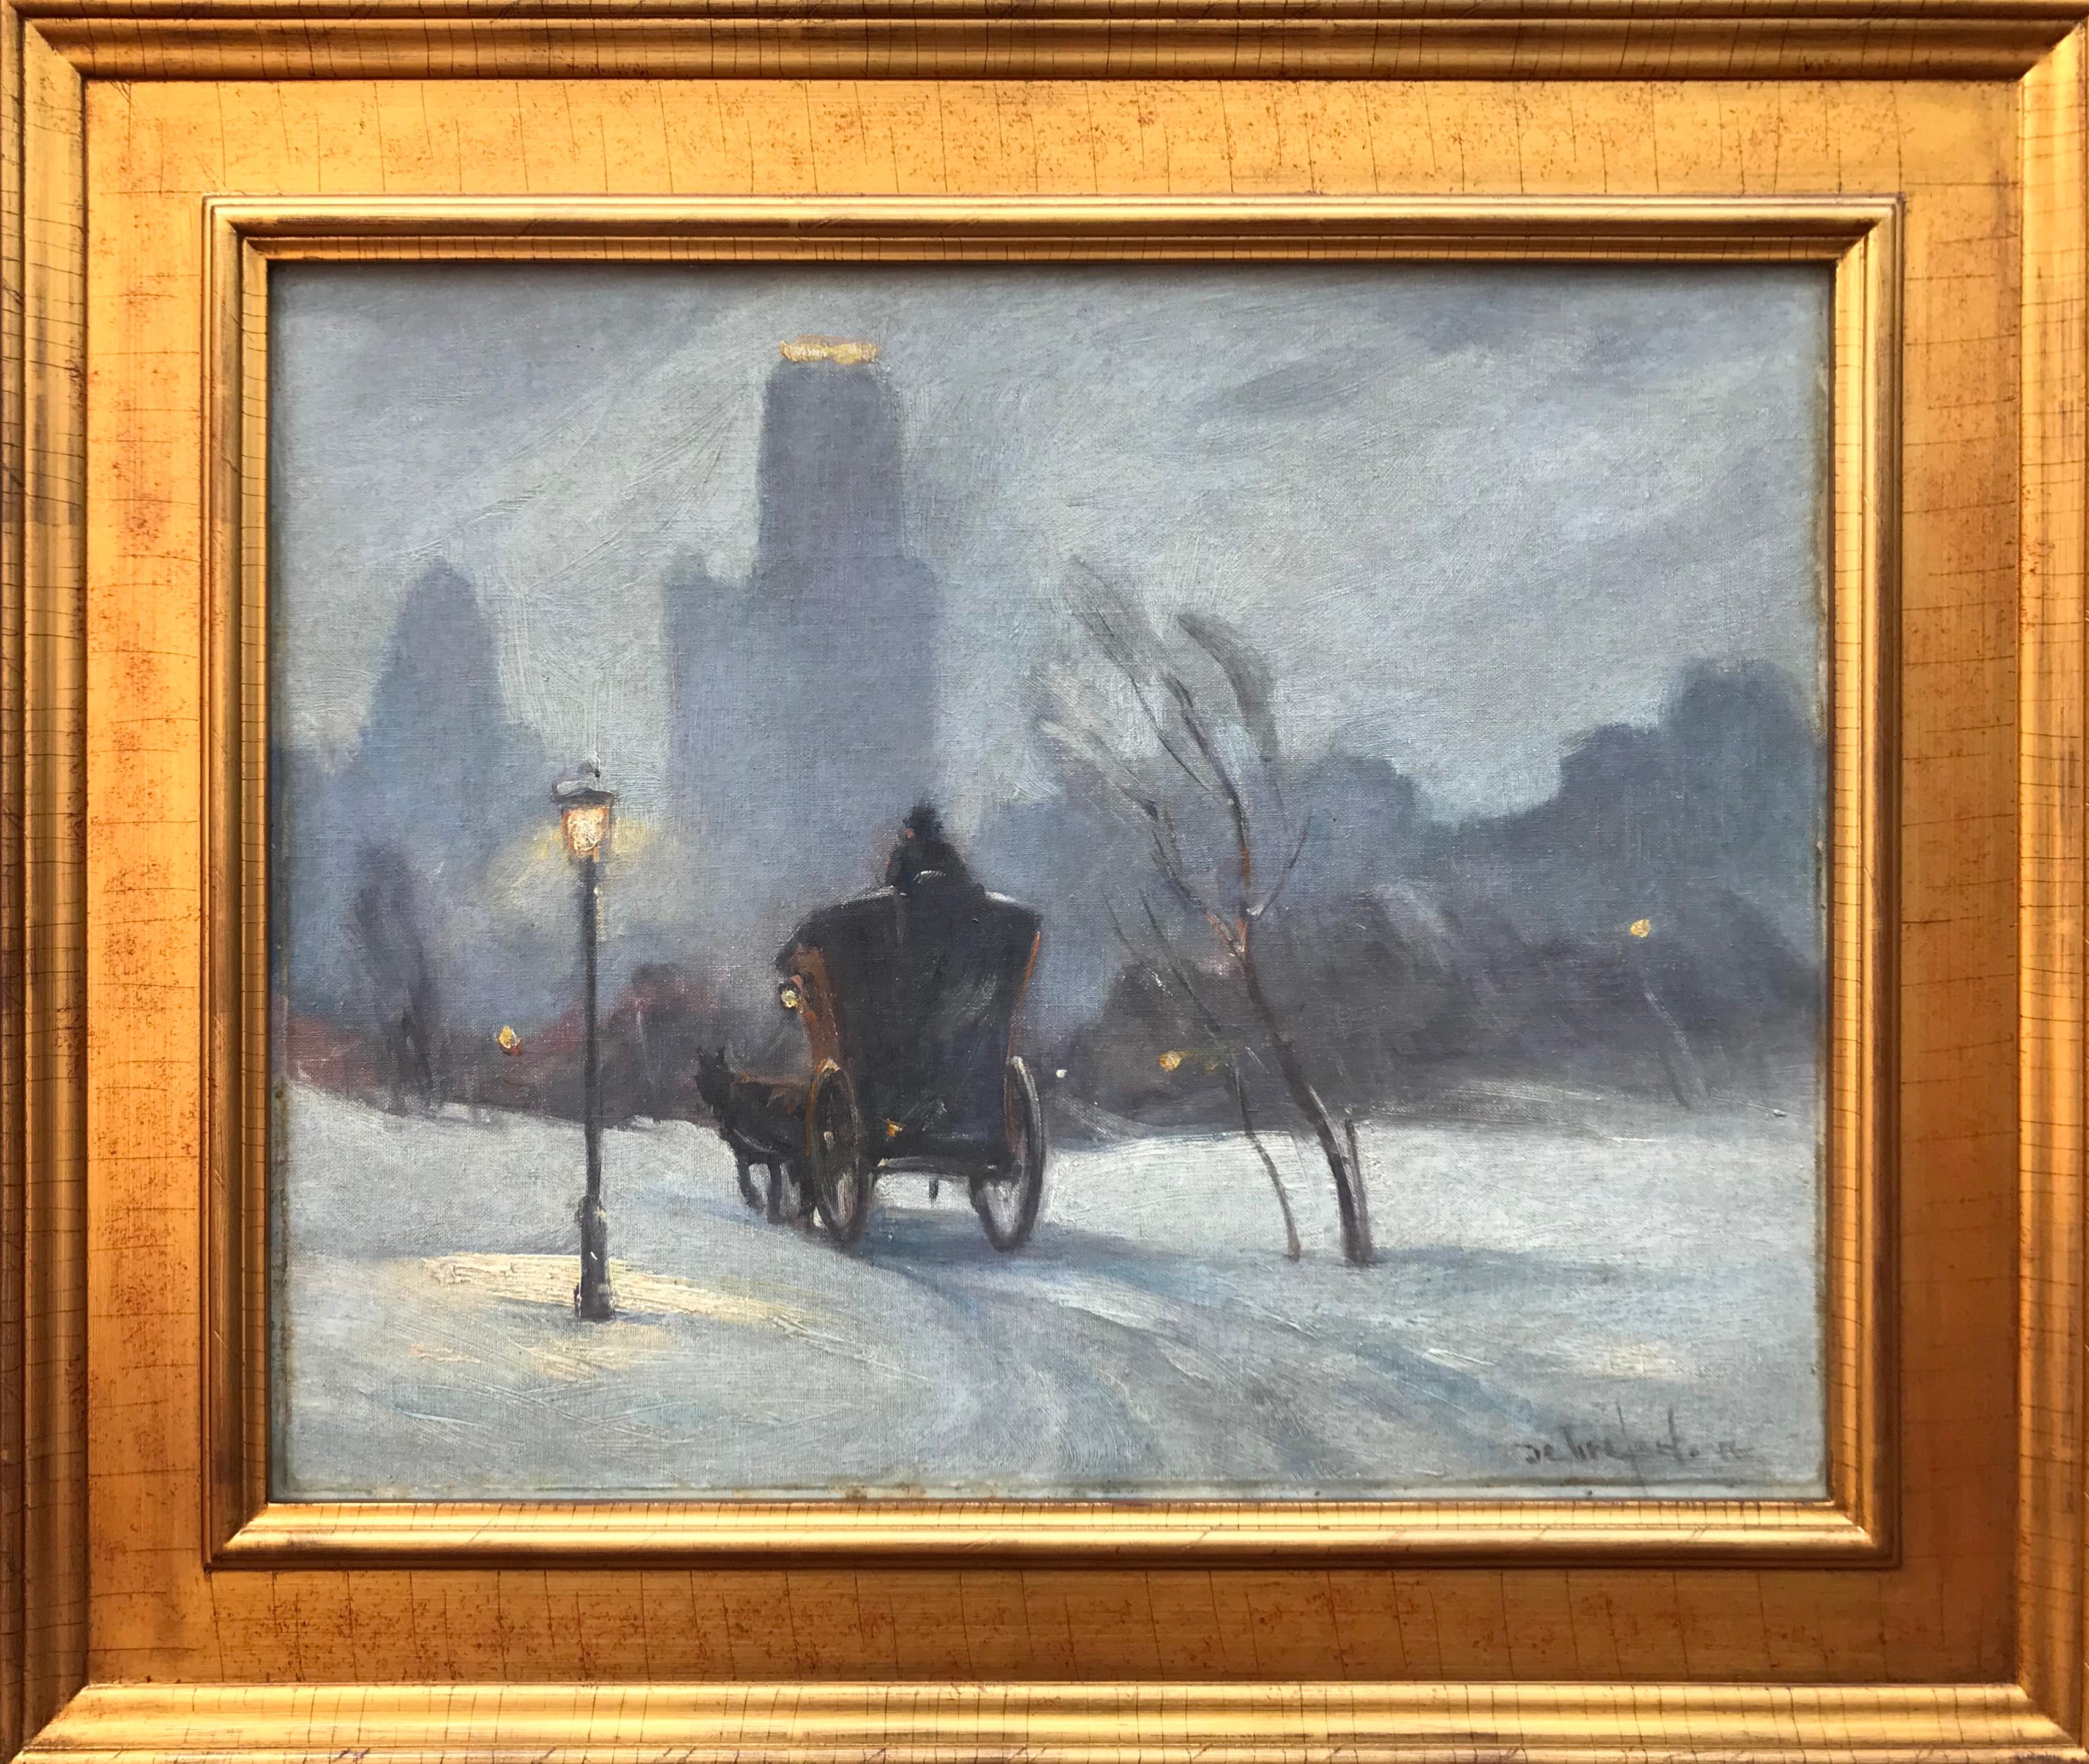 Stunning and atmospheric classic New York winter scene by noted Austrian-born, American artist Bela de Tirefort. Bela de Tirefort was known for his stunning New York scenes, mostly painted on sight, leaving us with an enduring record of the